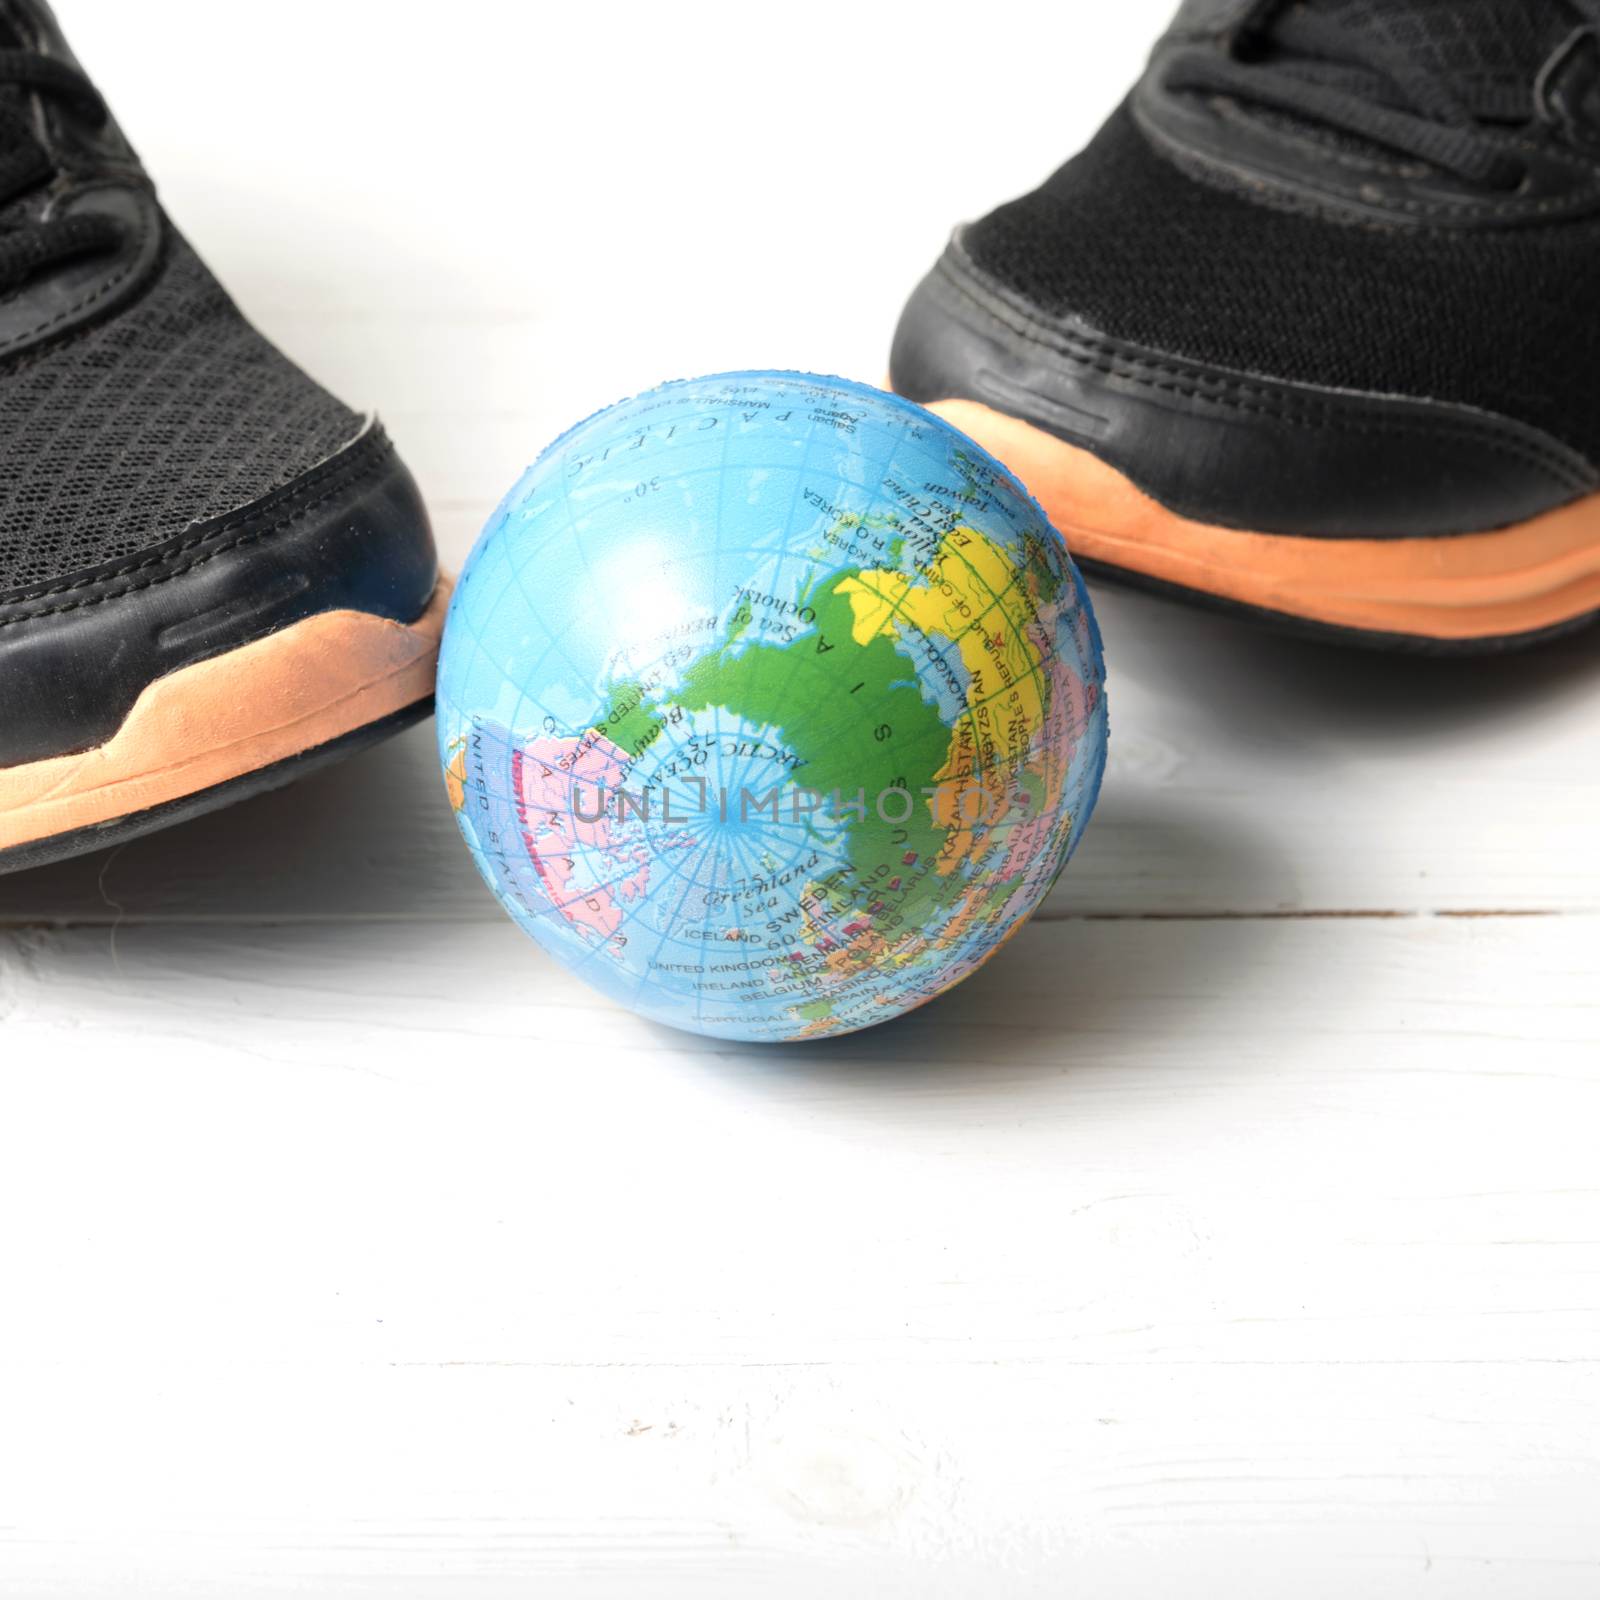 running shoes and earth ball by ammza12